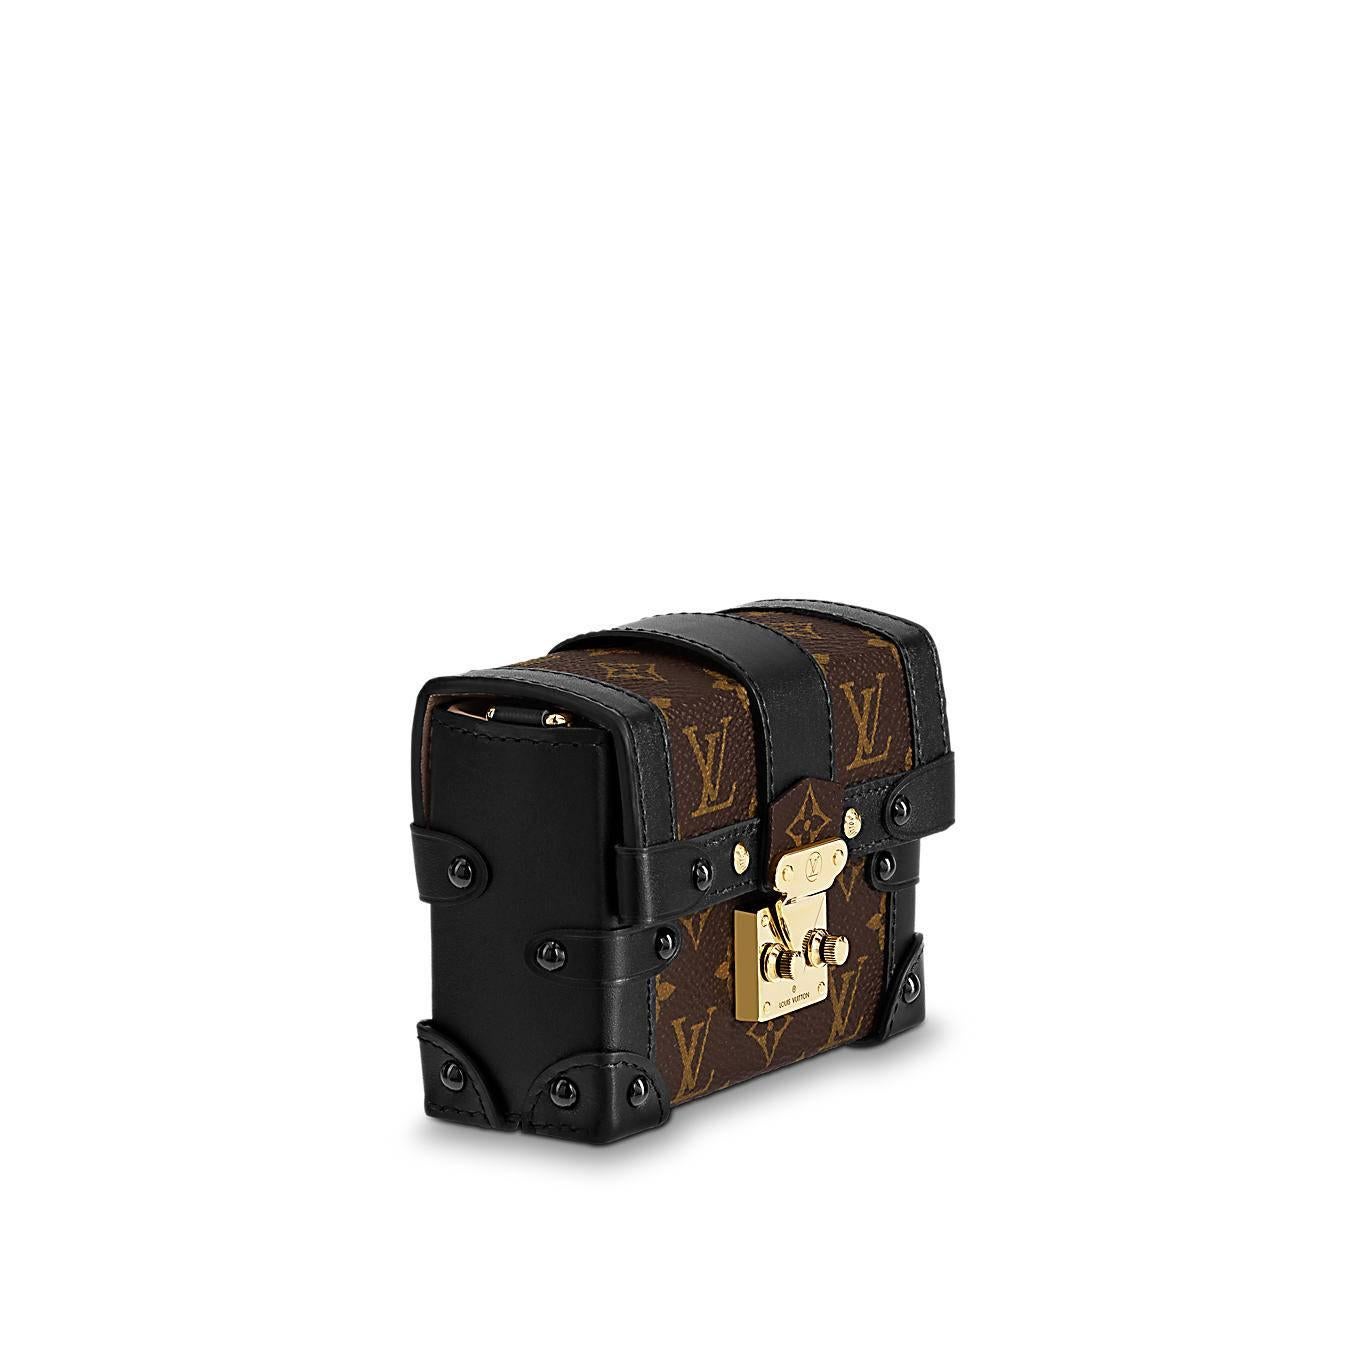 A miniature version of Louis Vuitton's iconic Petite Malle, replicating key details of the historic trunks, the Essential Trunk is the most elegant way to carry a few precious essentials. Its removable chain offers different carry options, while it